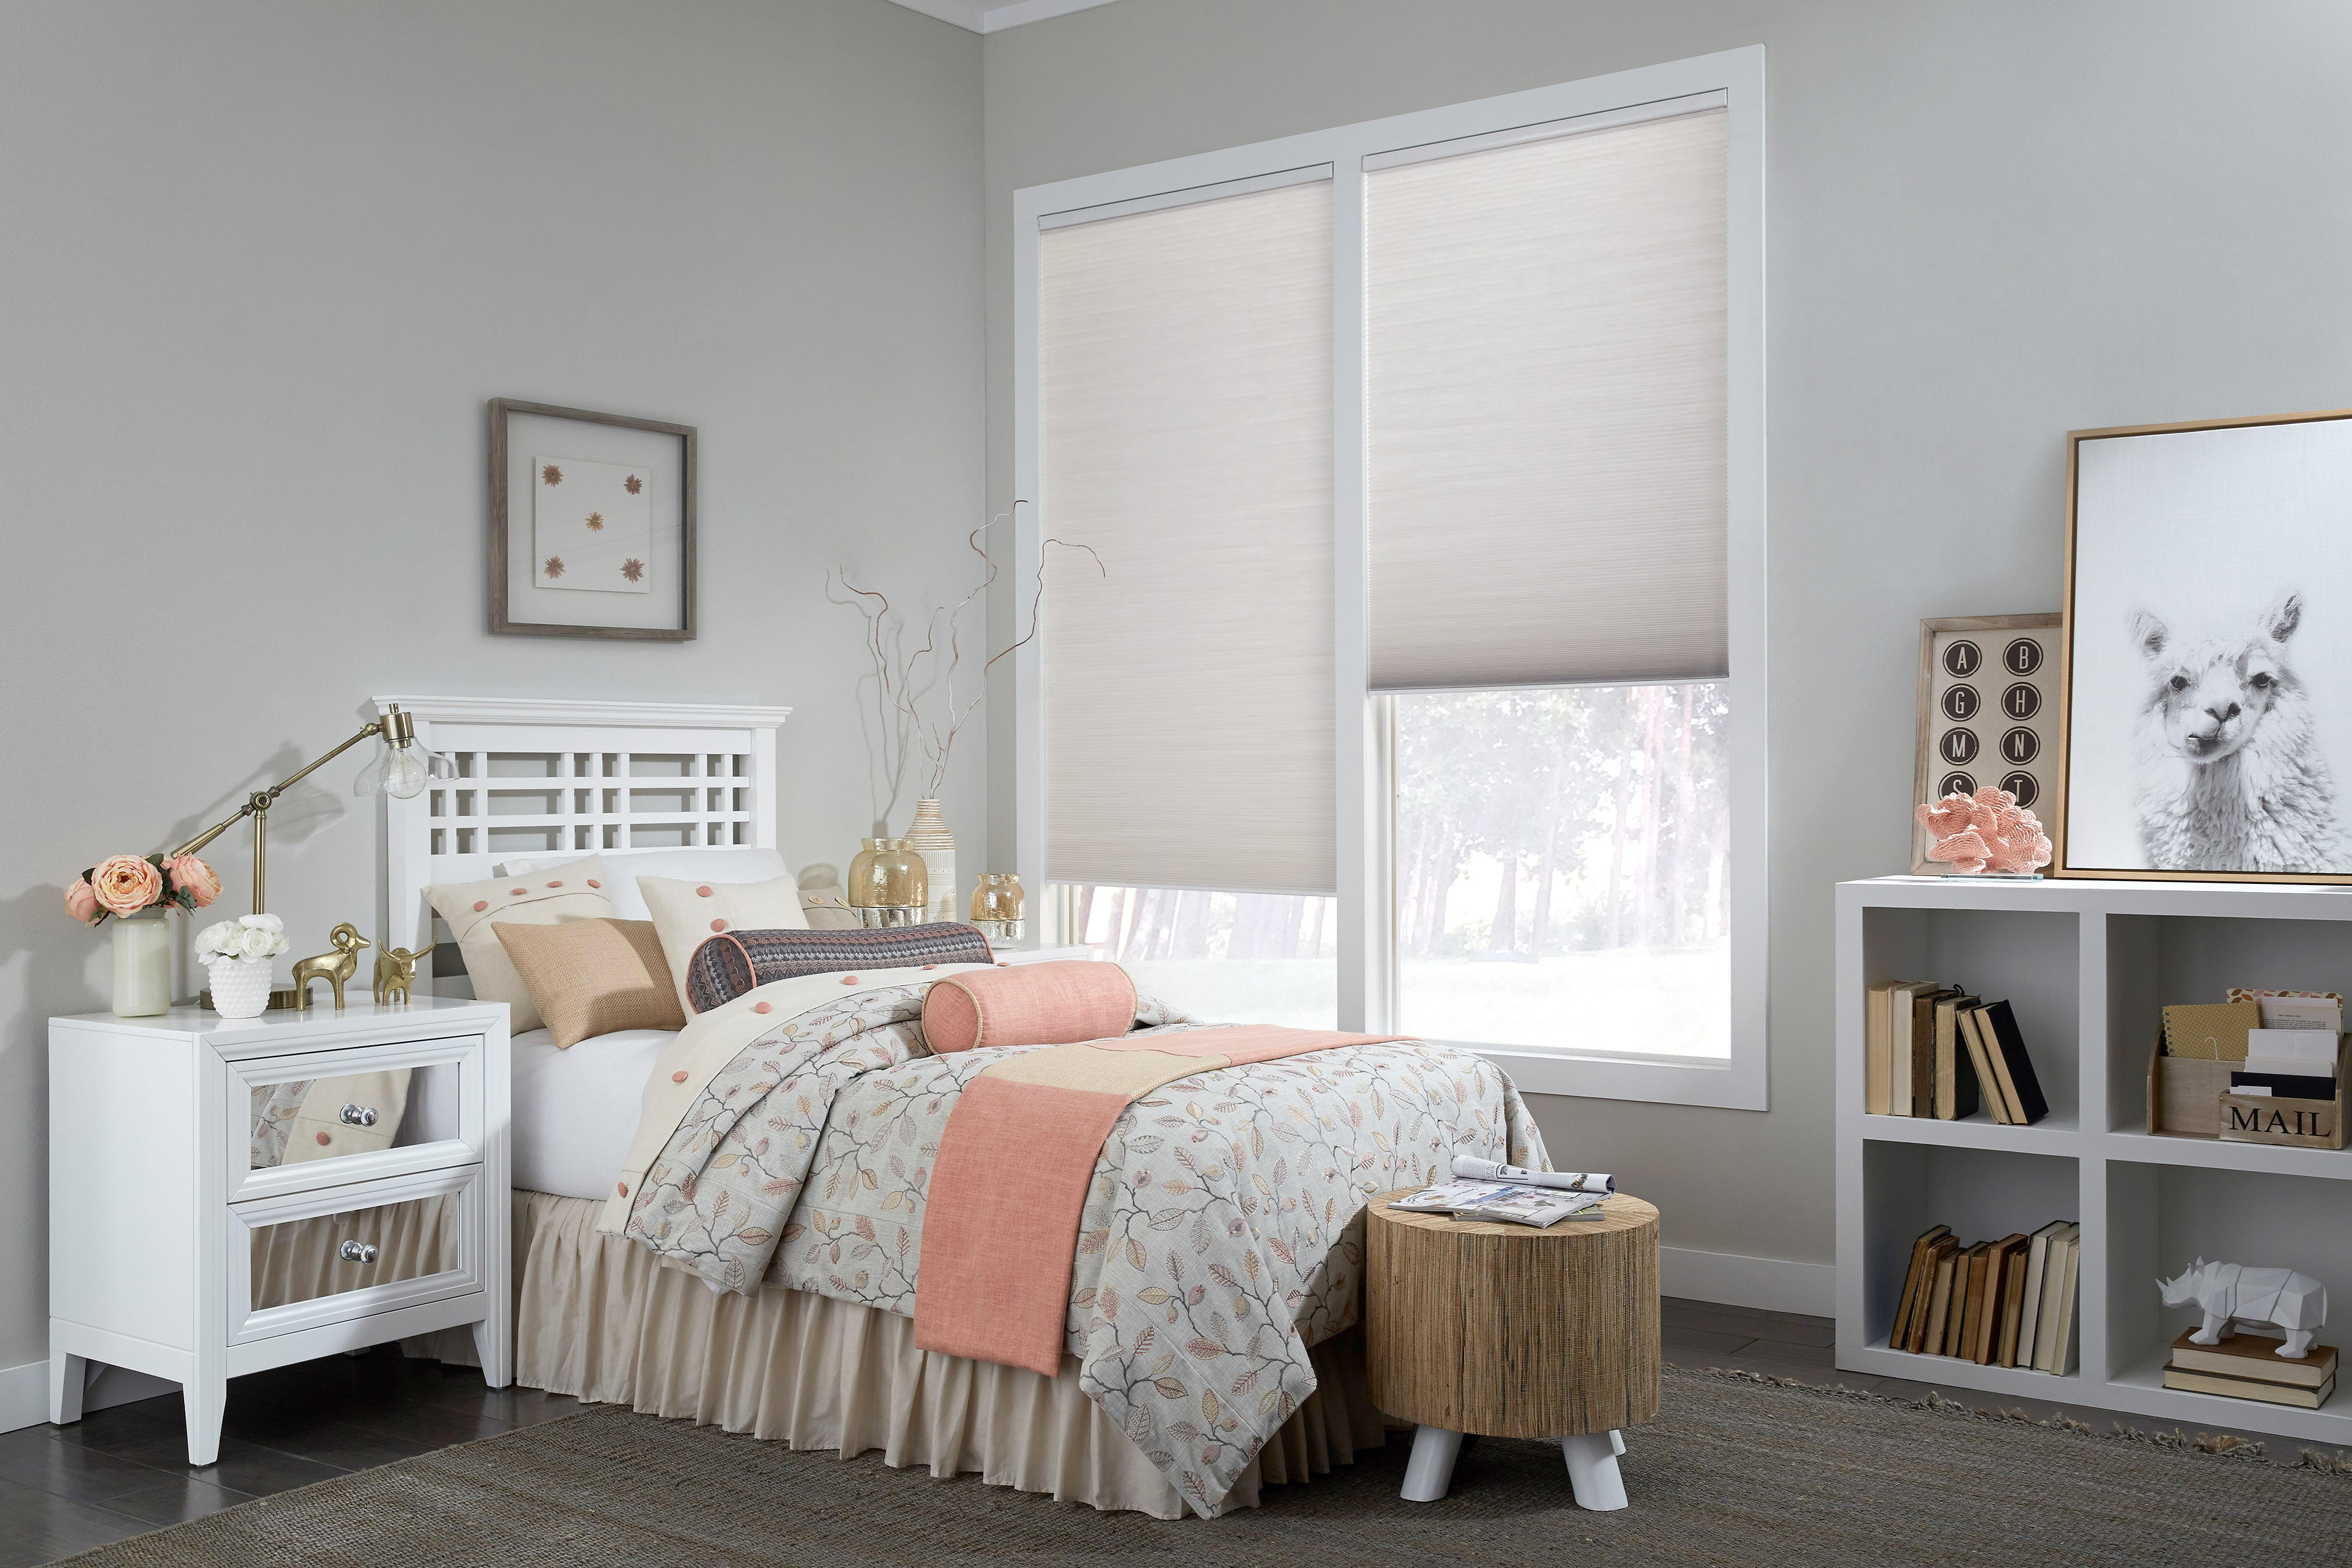 Budget Blinds of South East Calgary in Calgary: Energy Efficient Honeycomb Blinds